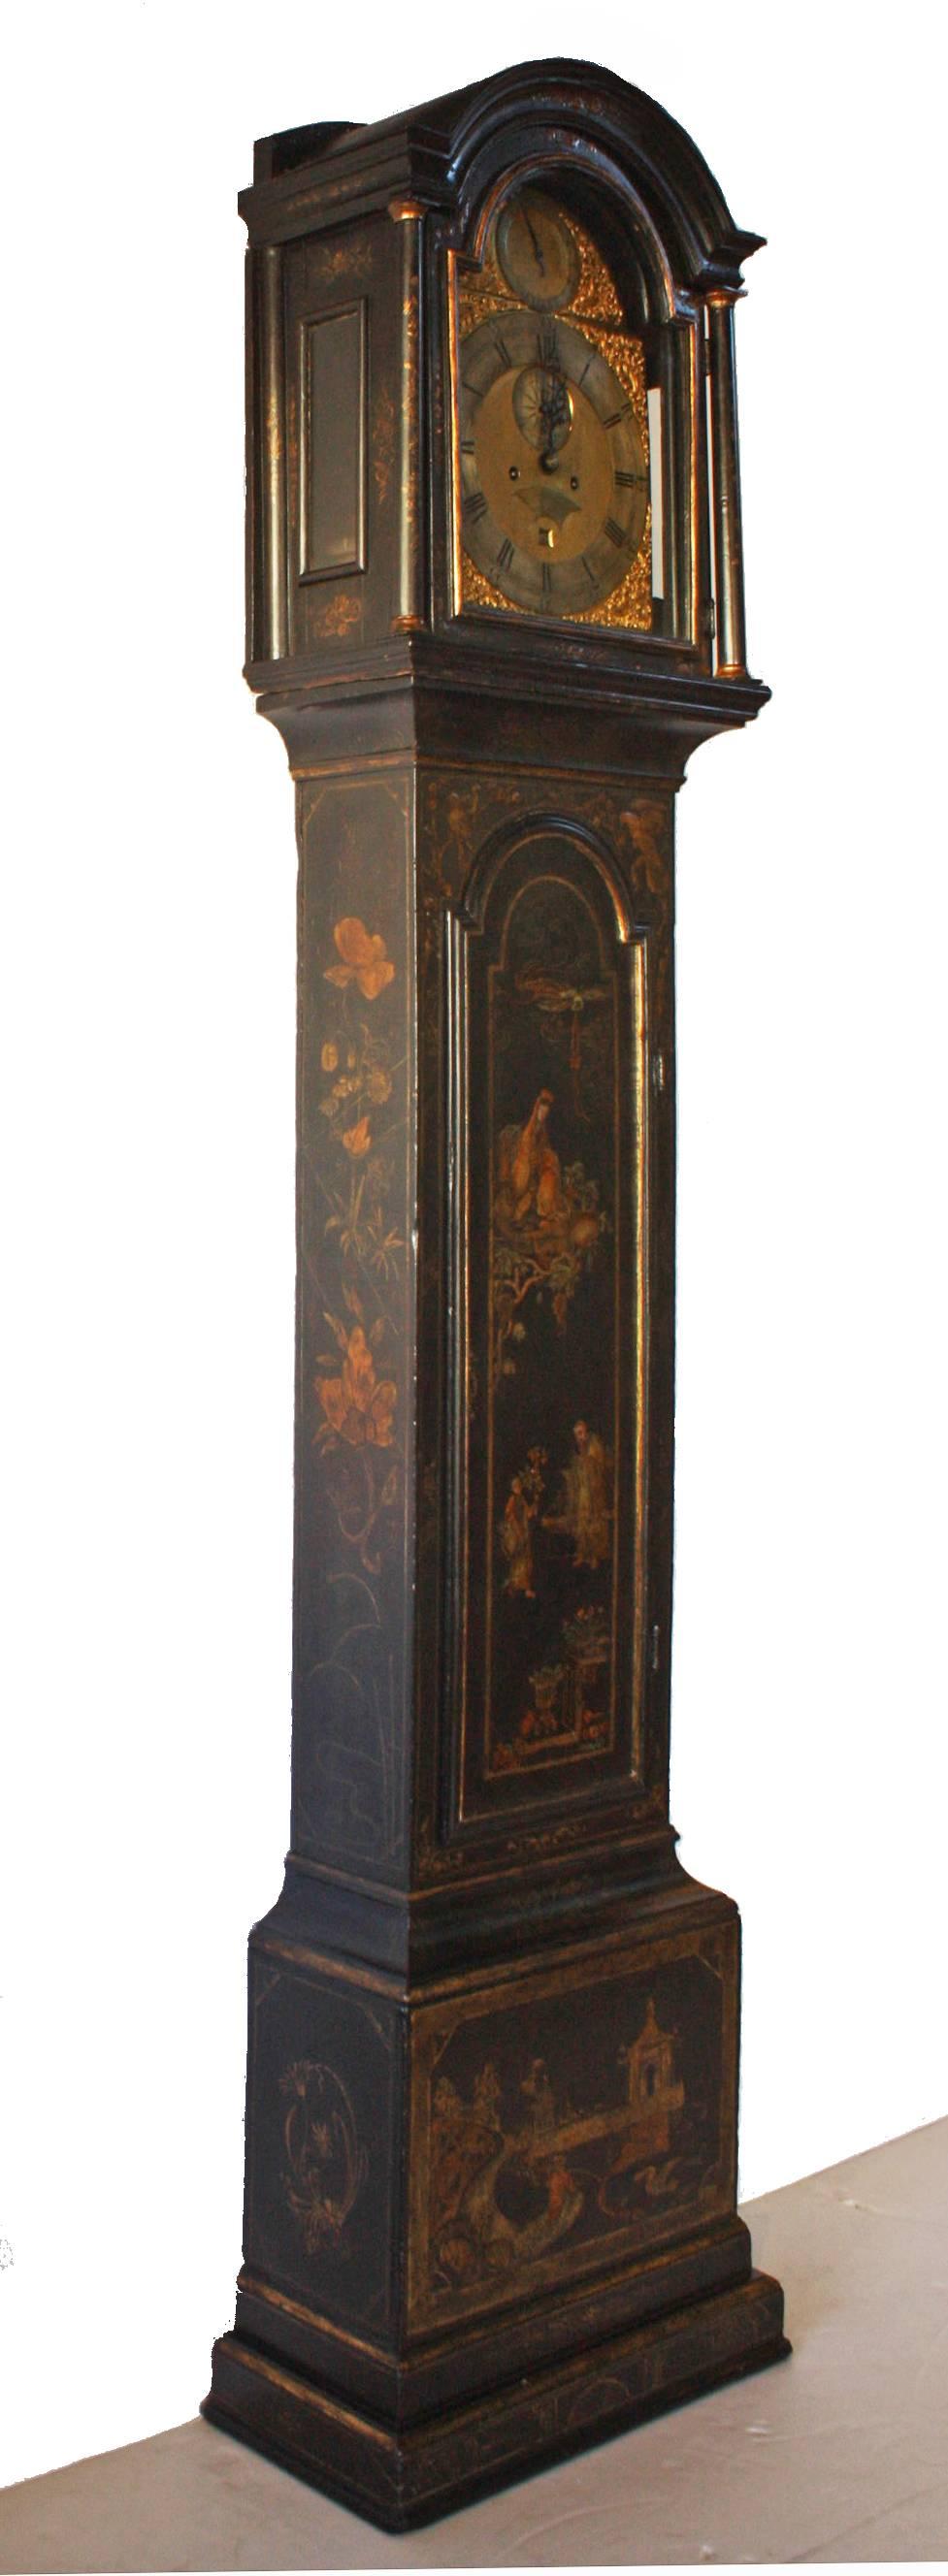 A George II longcase clock with chinoiserie decoration by London clock and watchmaker John Crouch / Knightsbridge (an exclusive residential and retail district in central London).